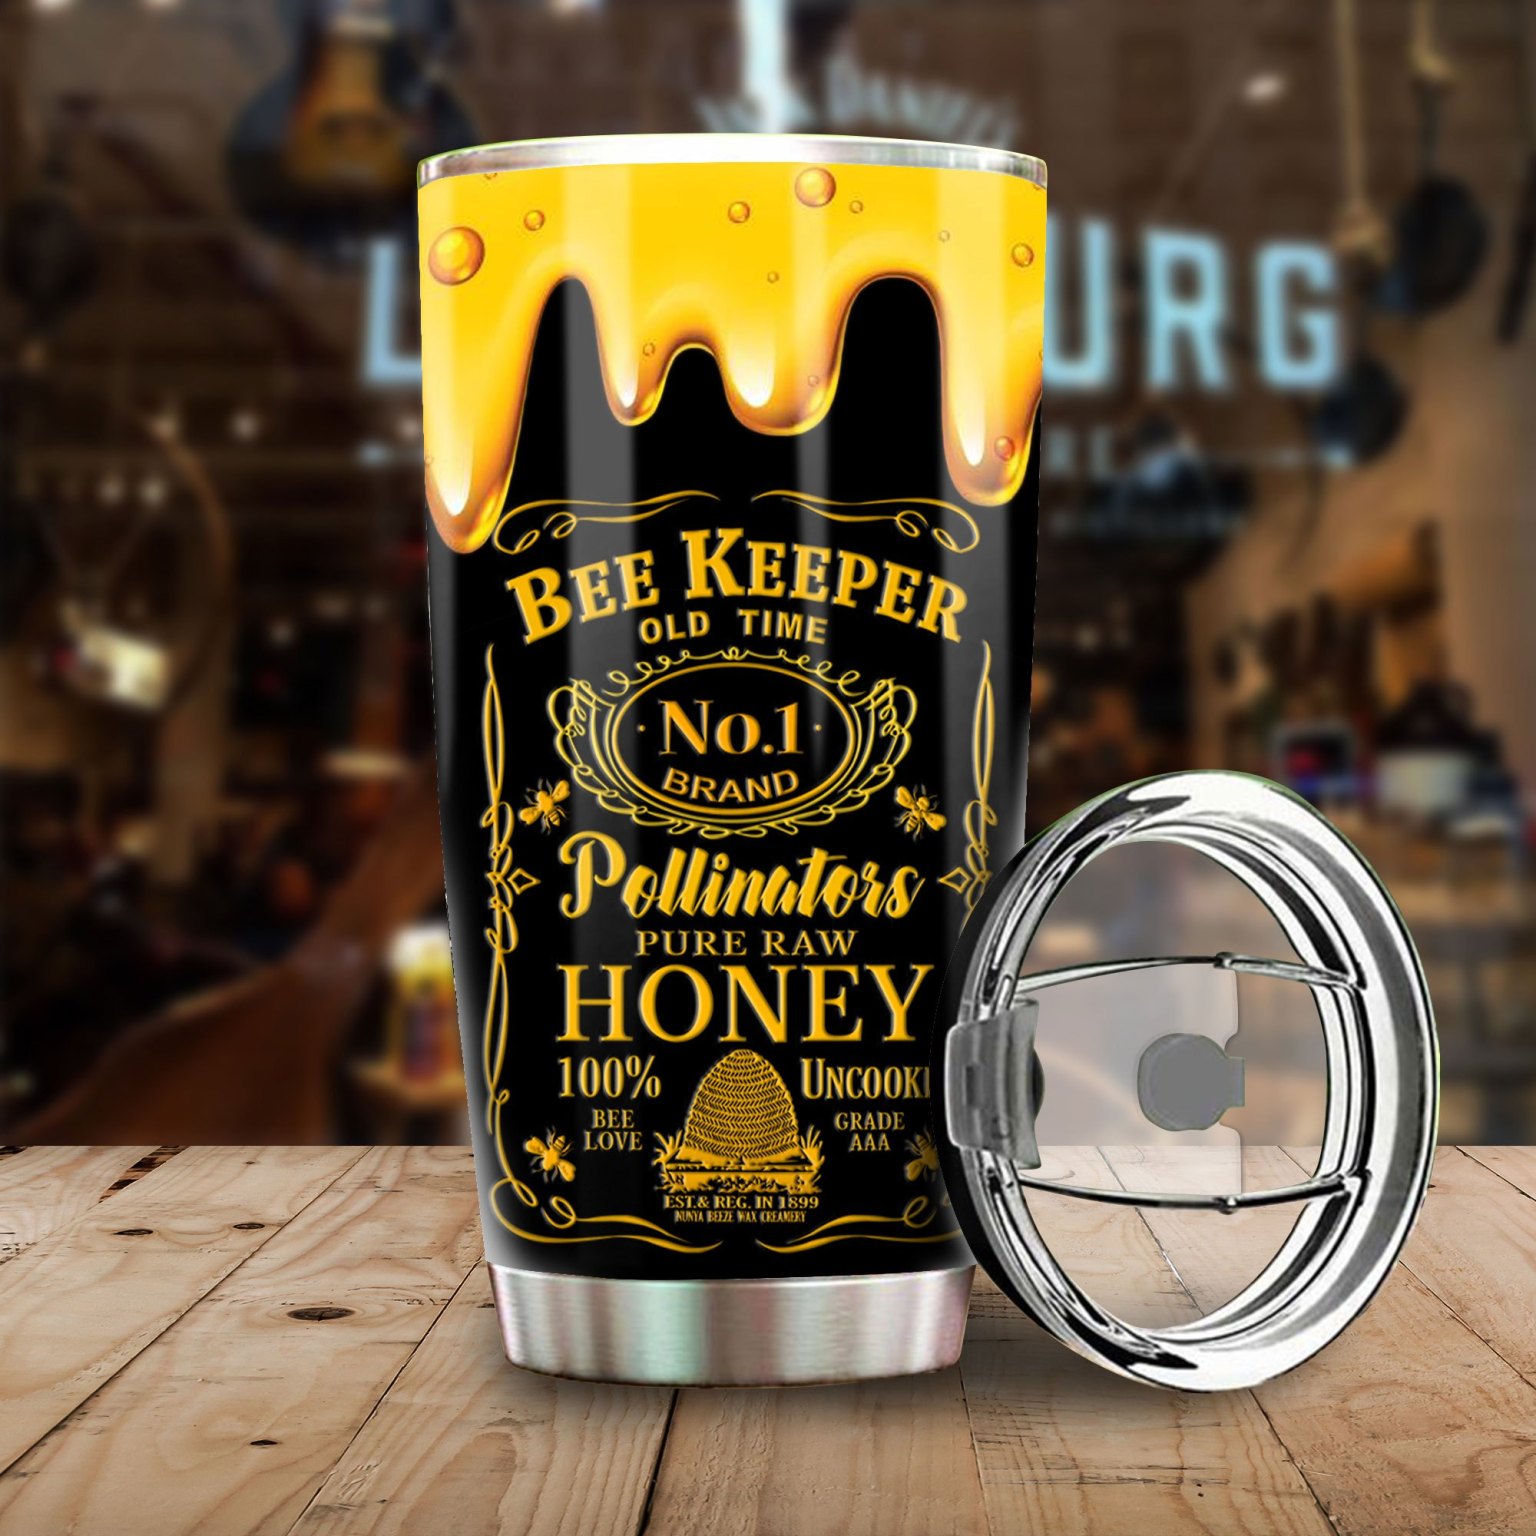 Bee keeper old time no 1 brand pollinators pure raw honey stainless steel tumbler - maria